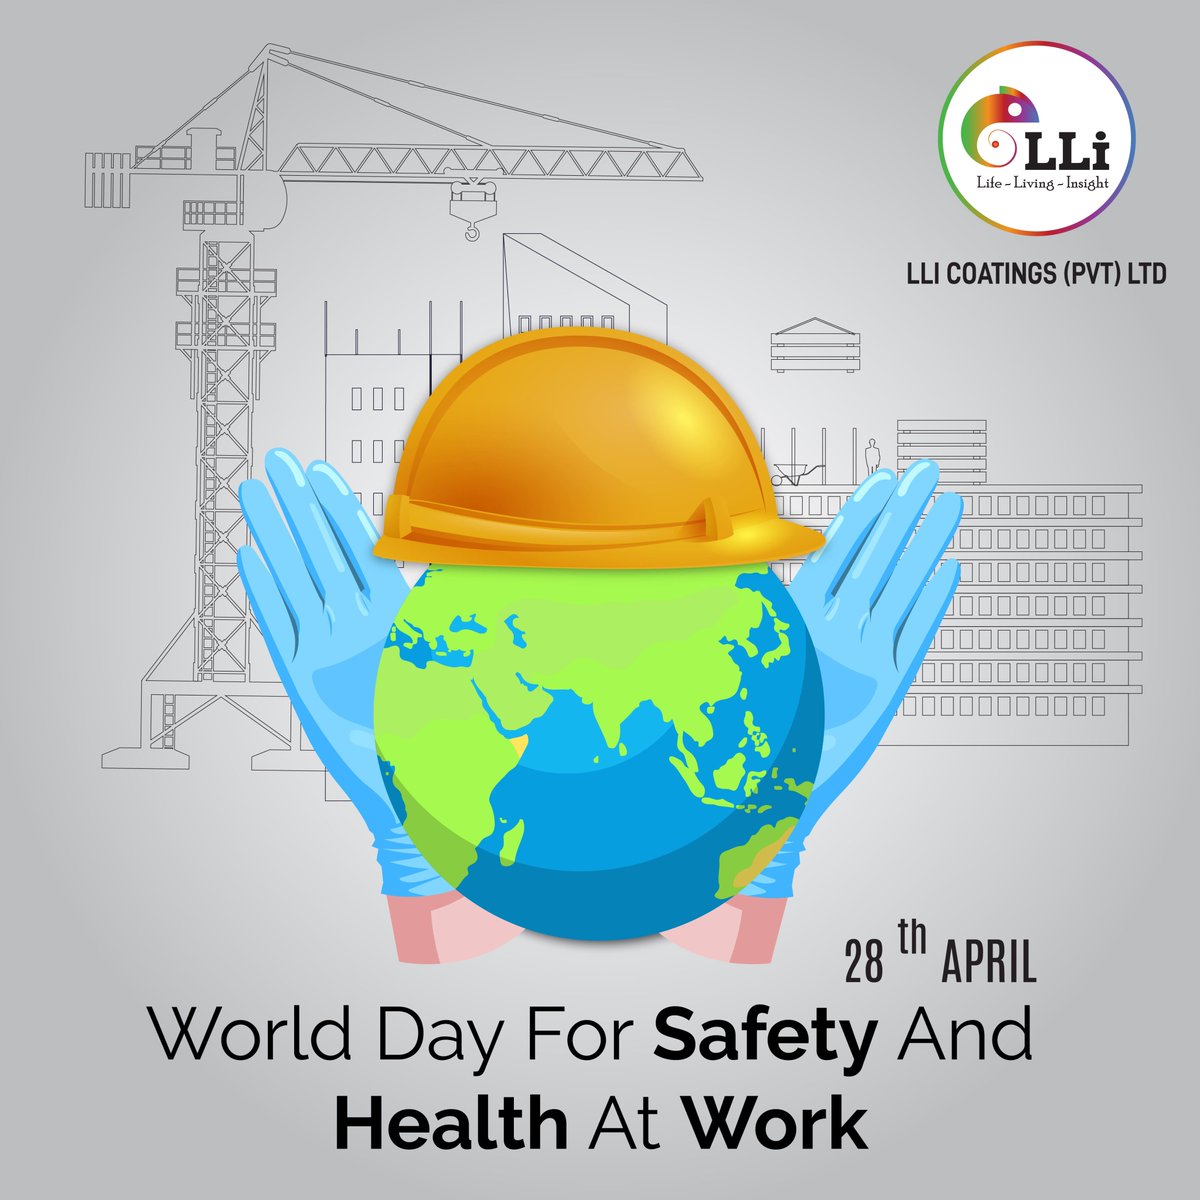 World Day for Safety and Health at Work....🦺💪
#safety #healthatwork #LLIcoatings #durablewallpaints #affordablepaint #emulsionpaint #HighQualityPaint #interiorpaints #waterbasedpaint #wallpaints #paintmanufacturer #housepaint #paintingtips #homepainting